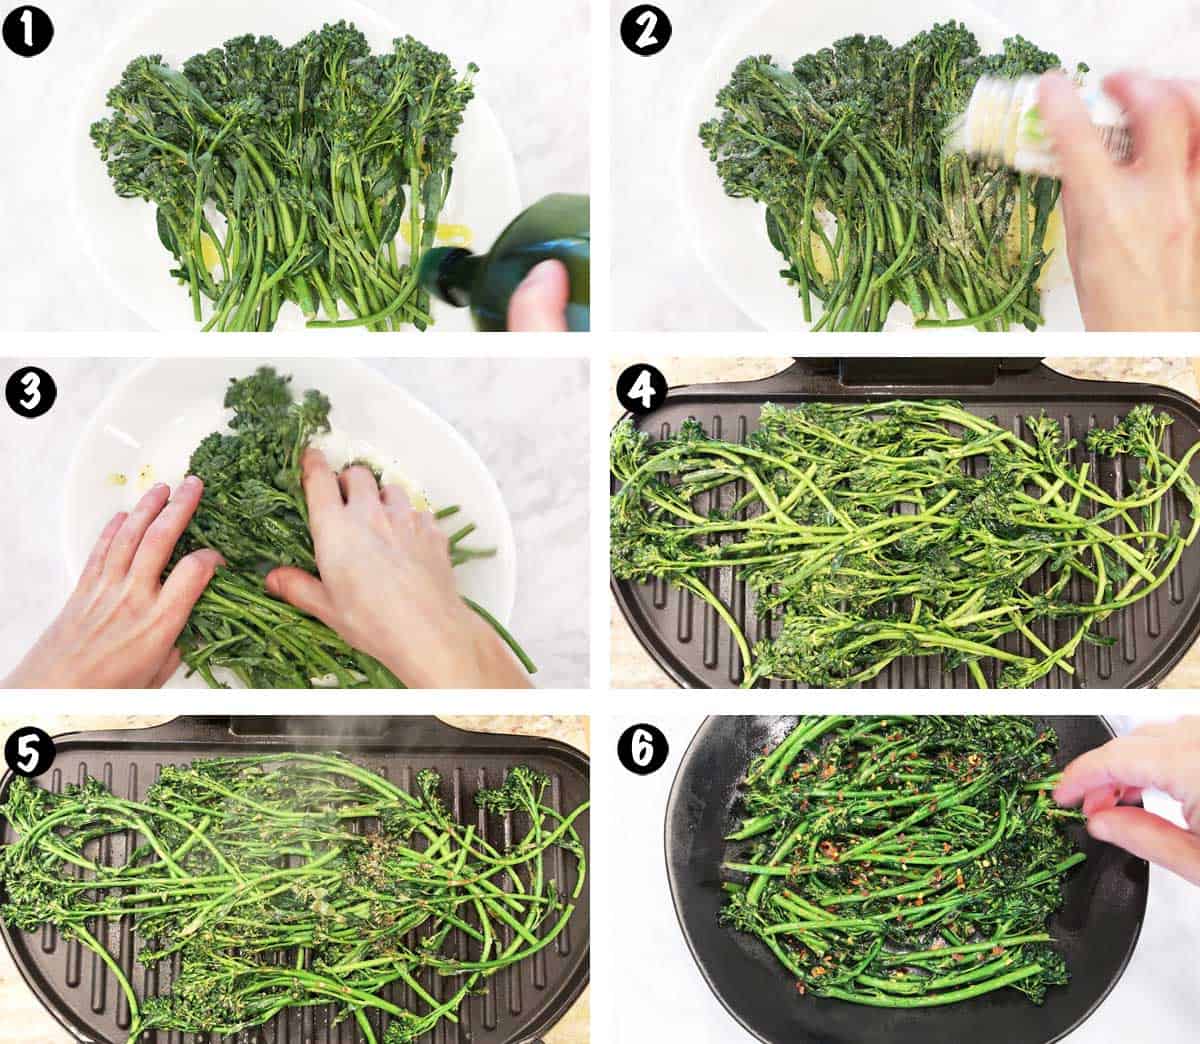 A six-photo collage showing the steps for grilling broccolini. 